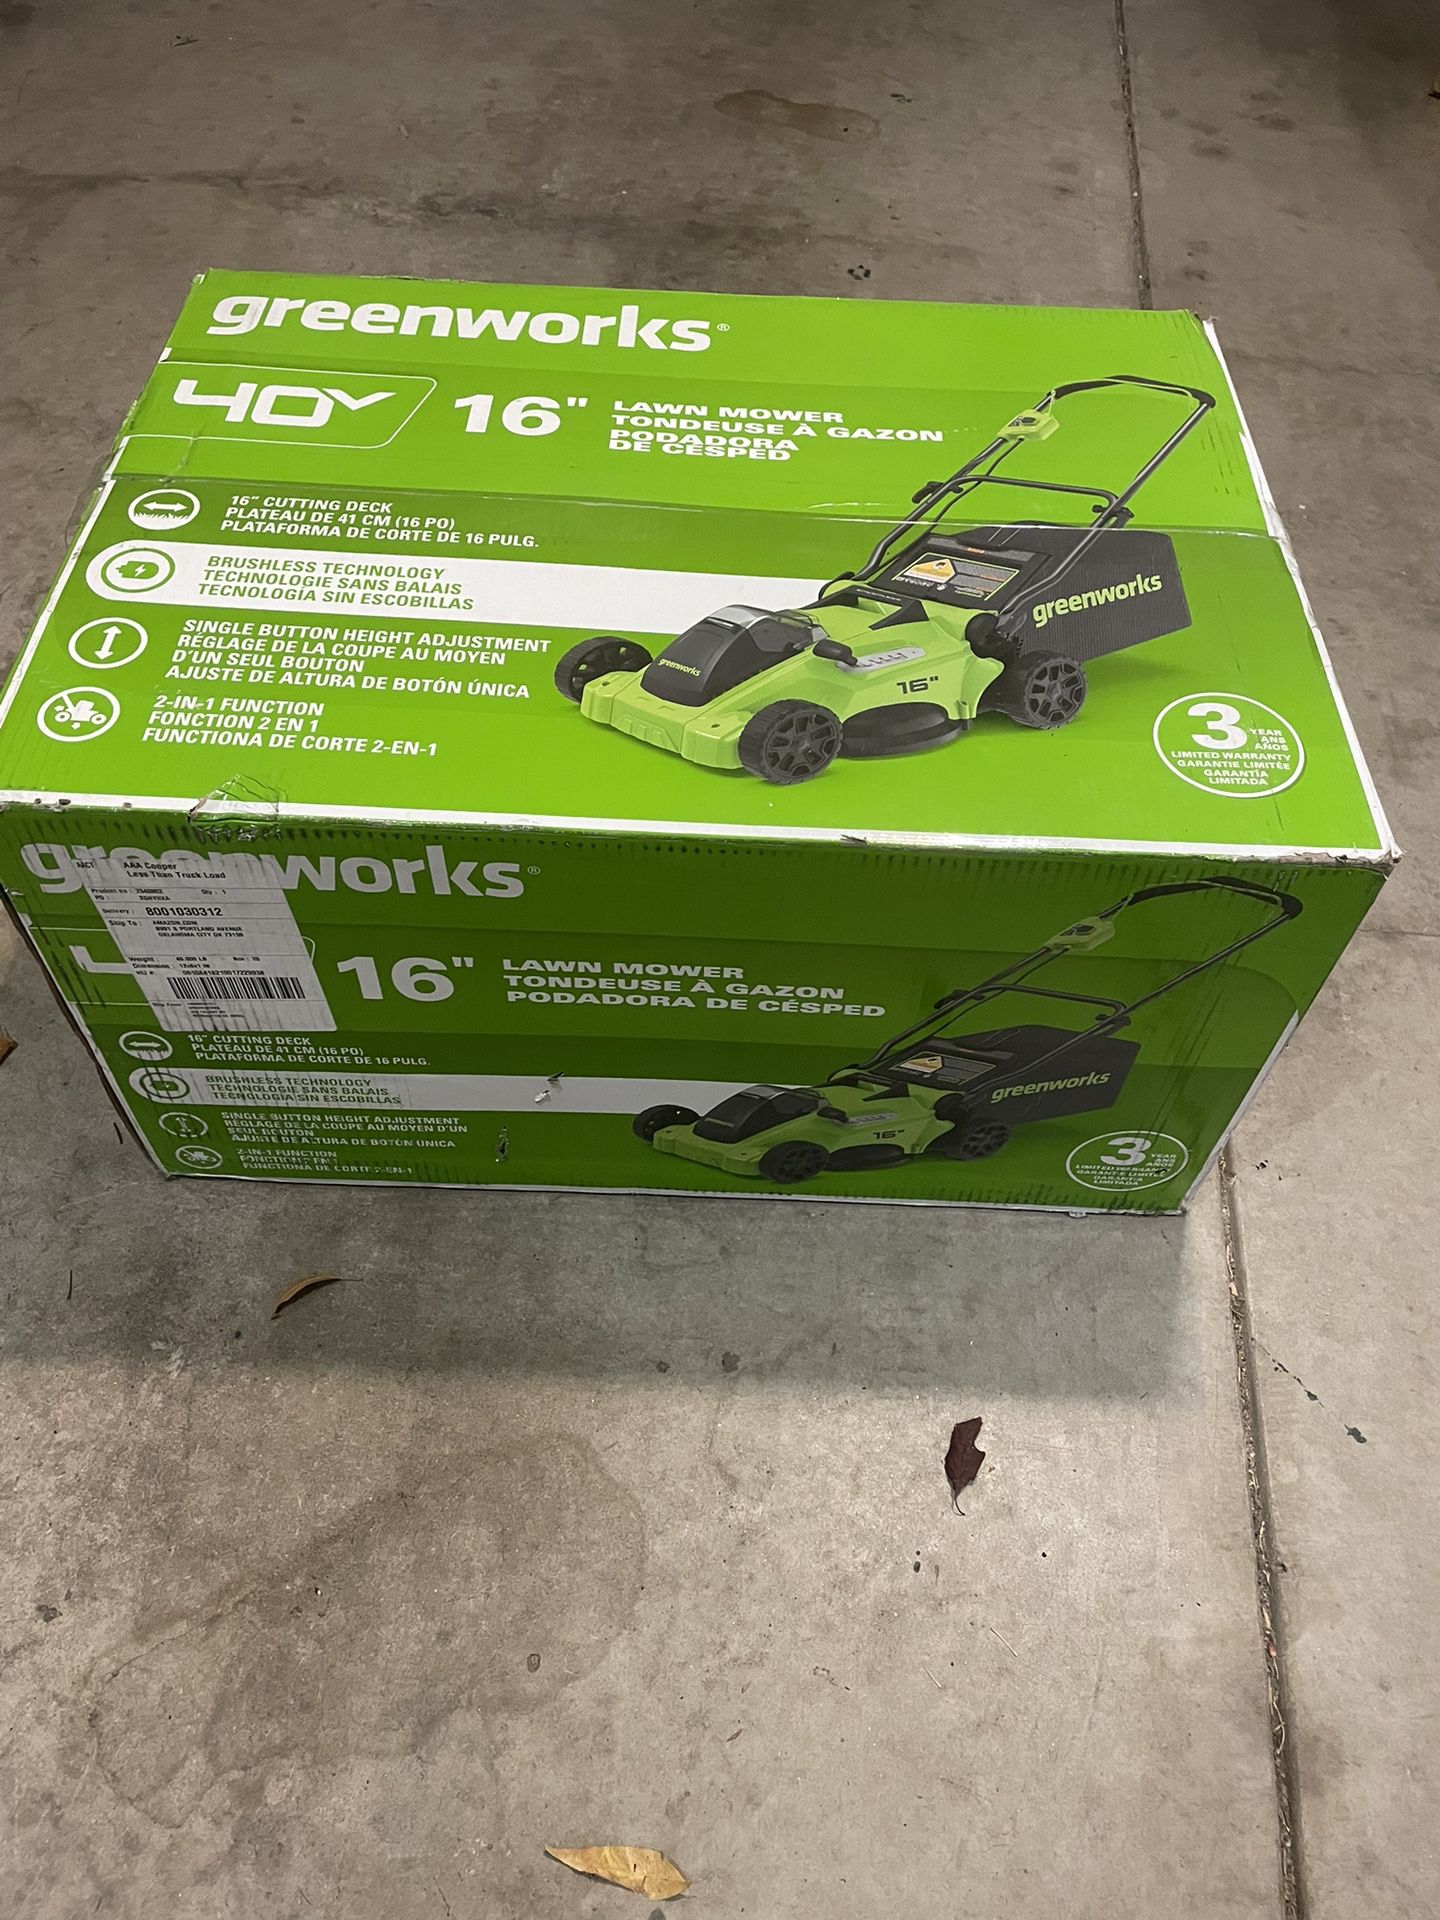 Electric (Cordless) Lawn Mower w/ 4.0 Ah battery - Brand New (Unopened)